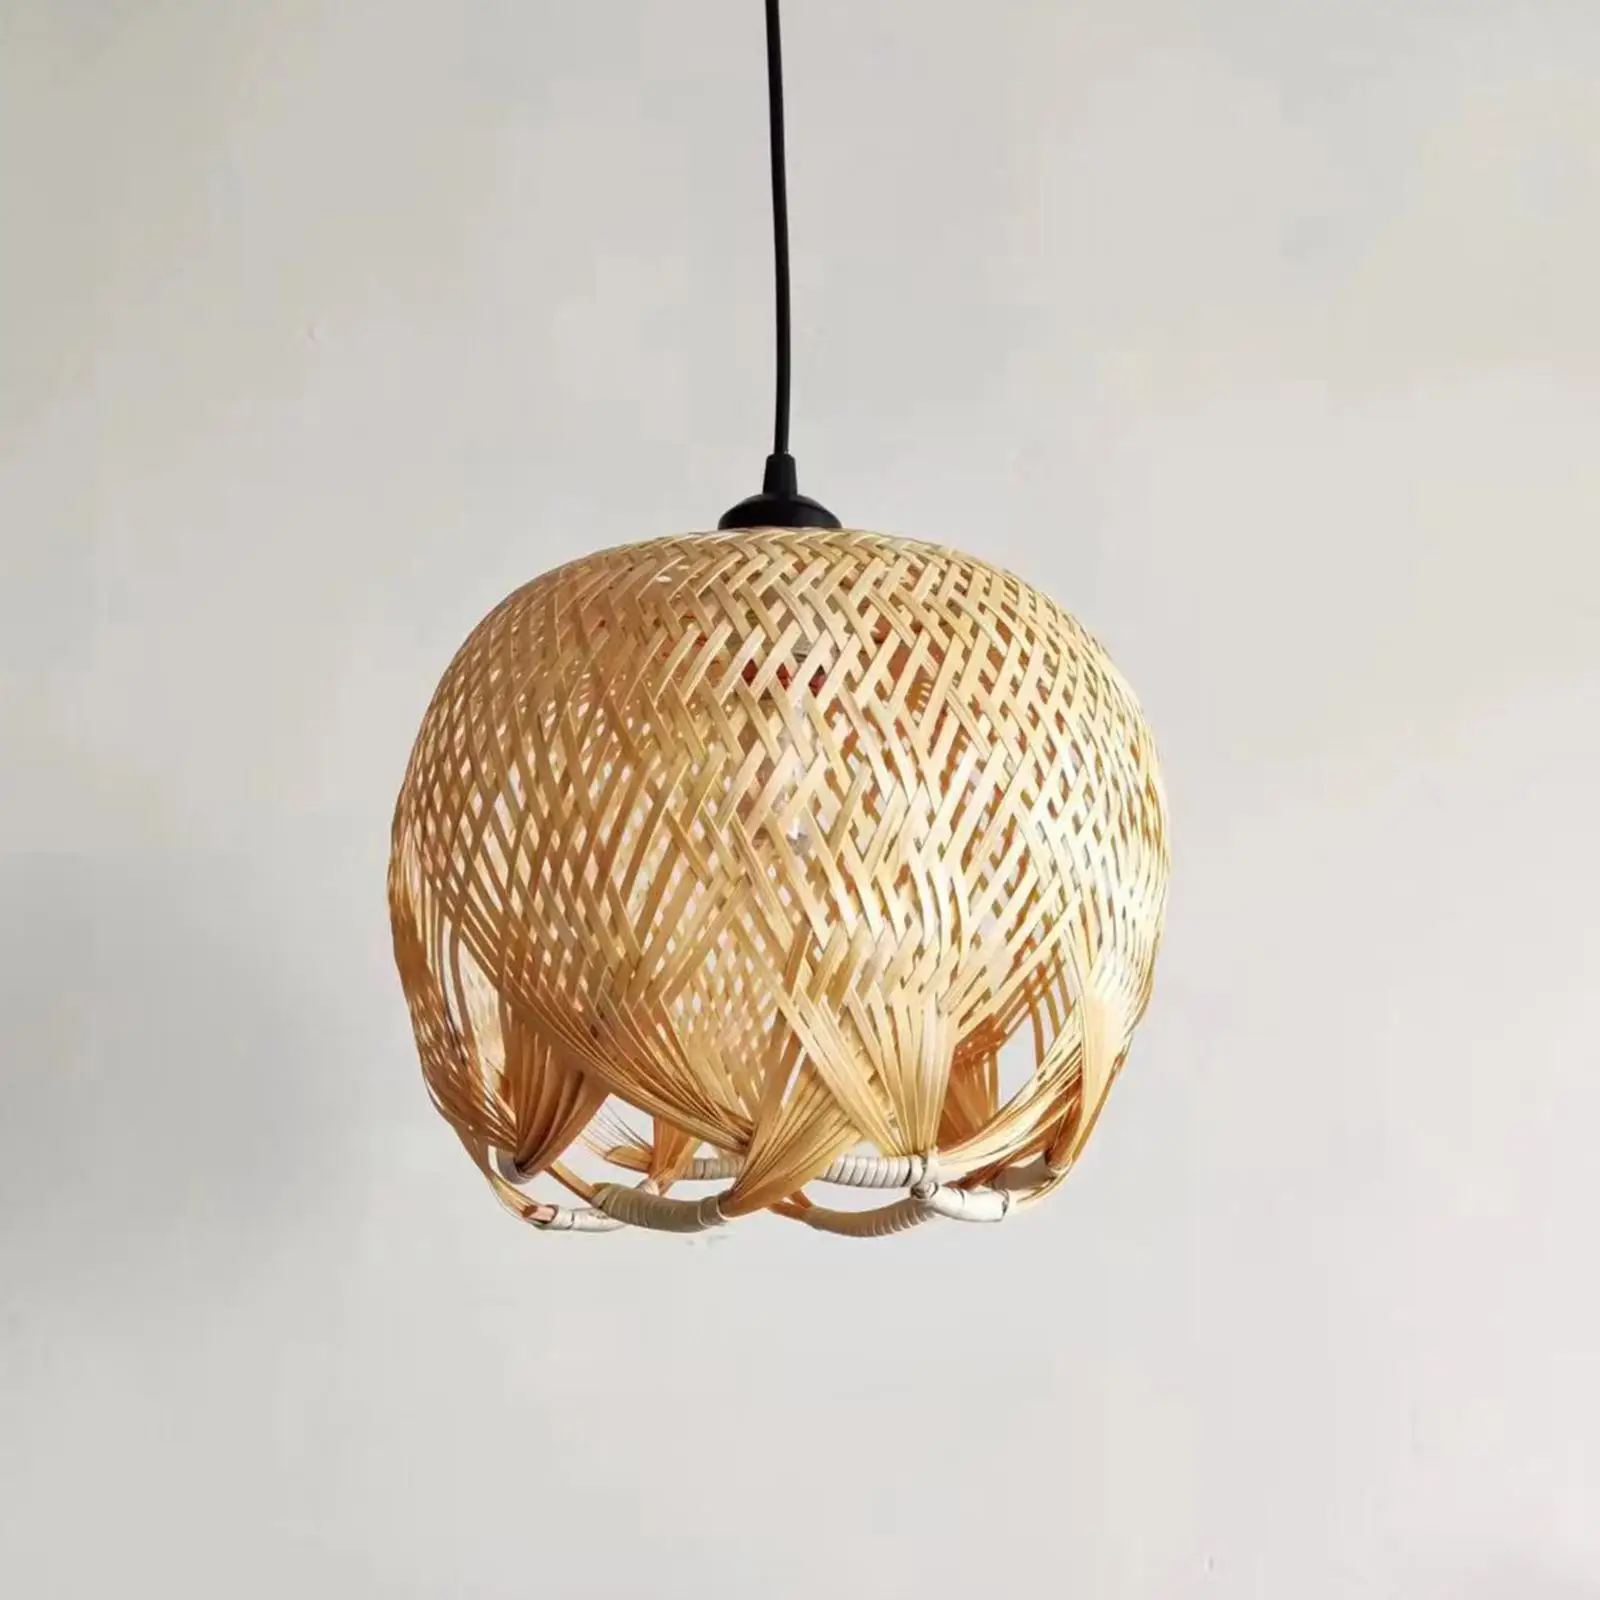 Rattan Hanging Lamp Shade Vintage Light Cover Pendant Lamp Shade Hand Woven for Cafe Living Room Hotel Kitchen Bar